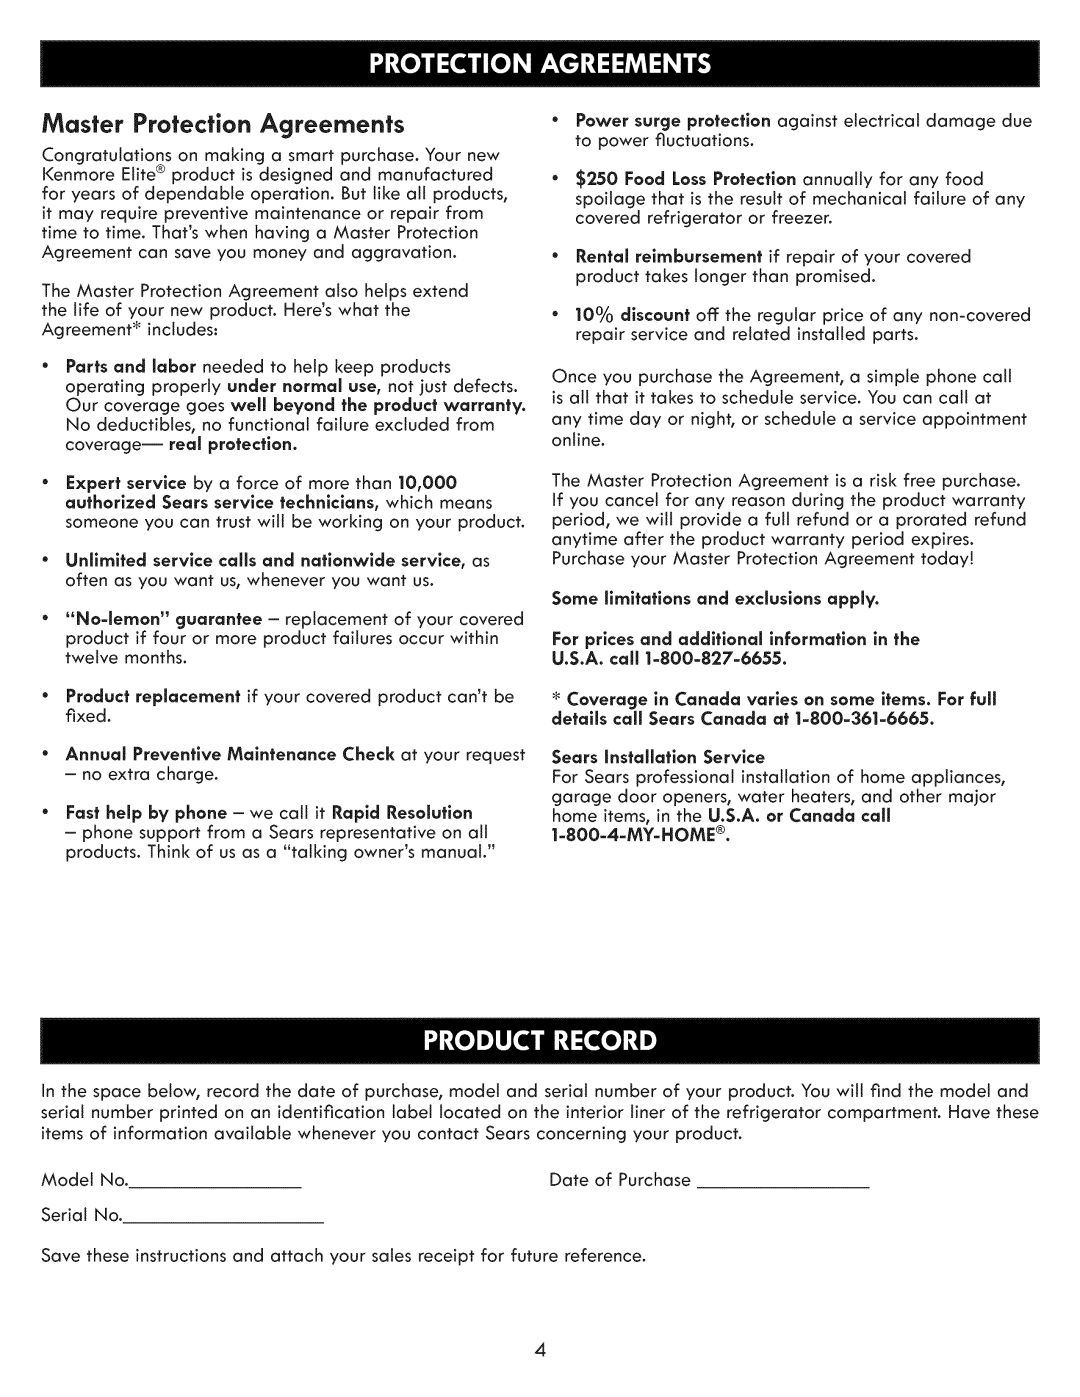 Kenmore 795.7202 manual Master Protection Agreements, Sears Installation Service, My-Home 